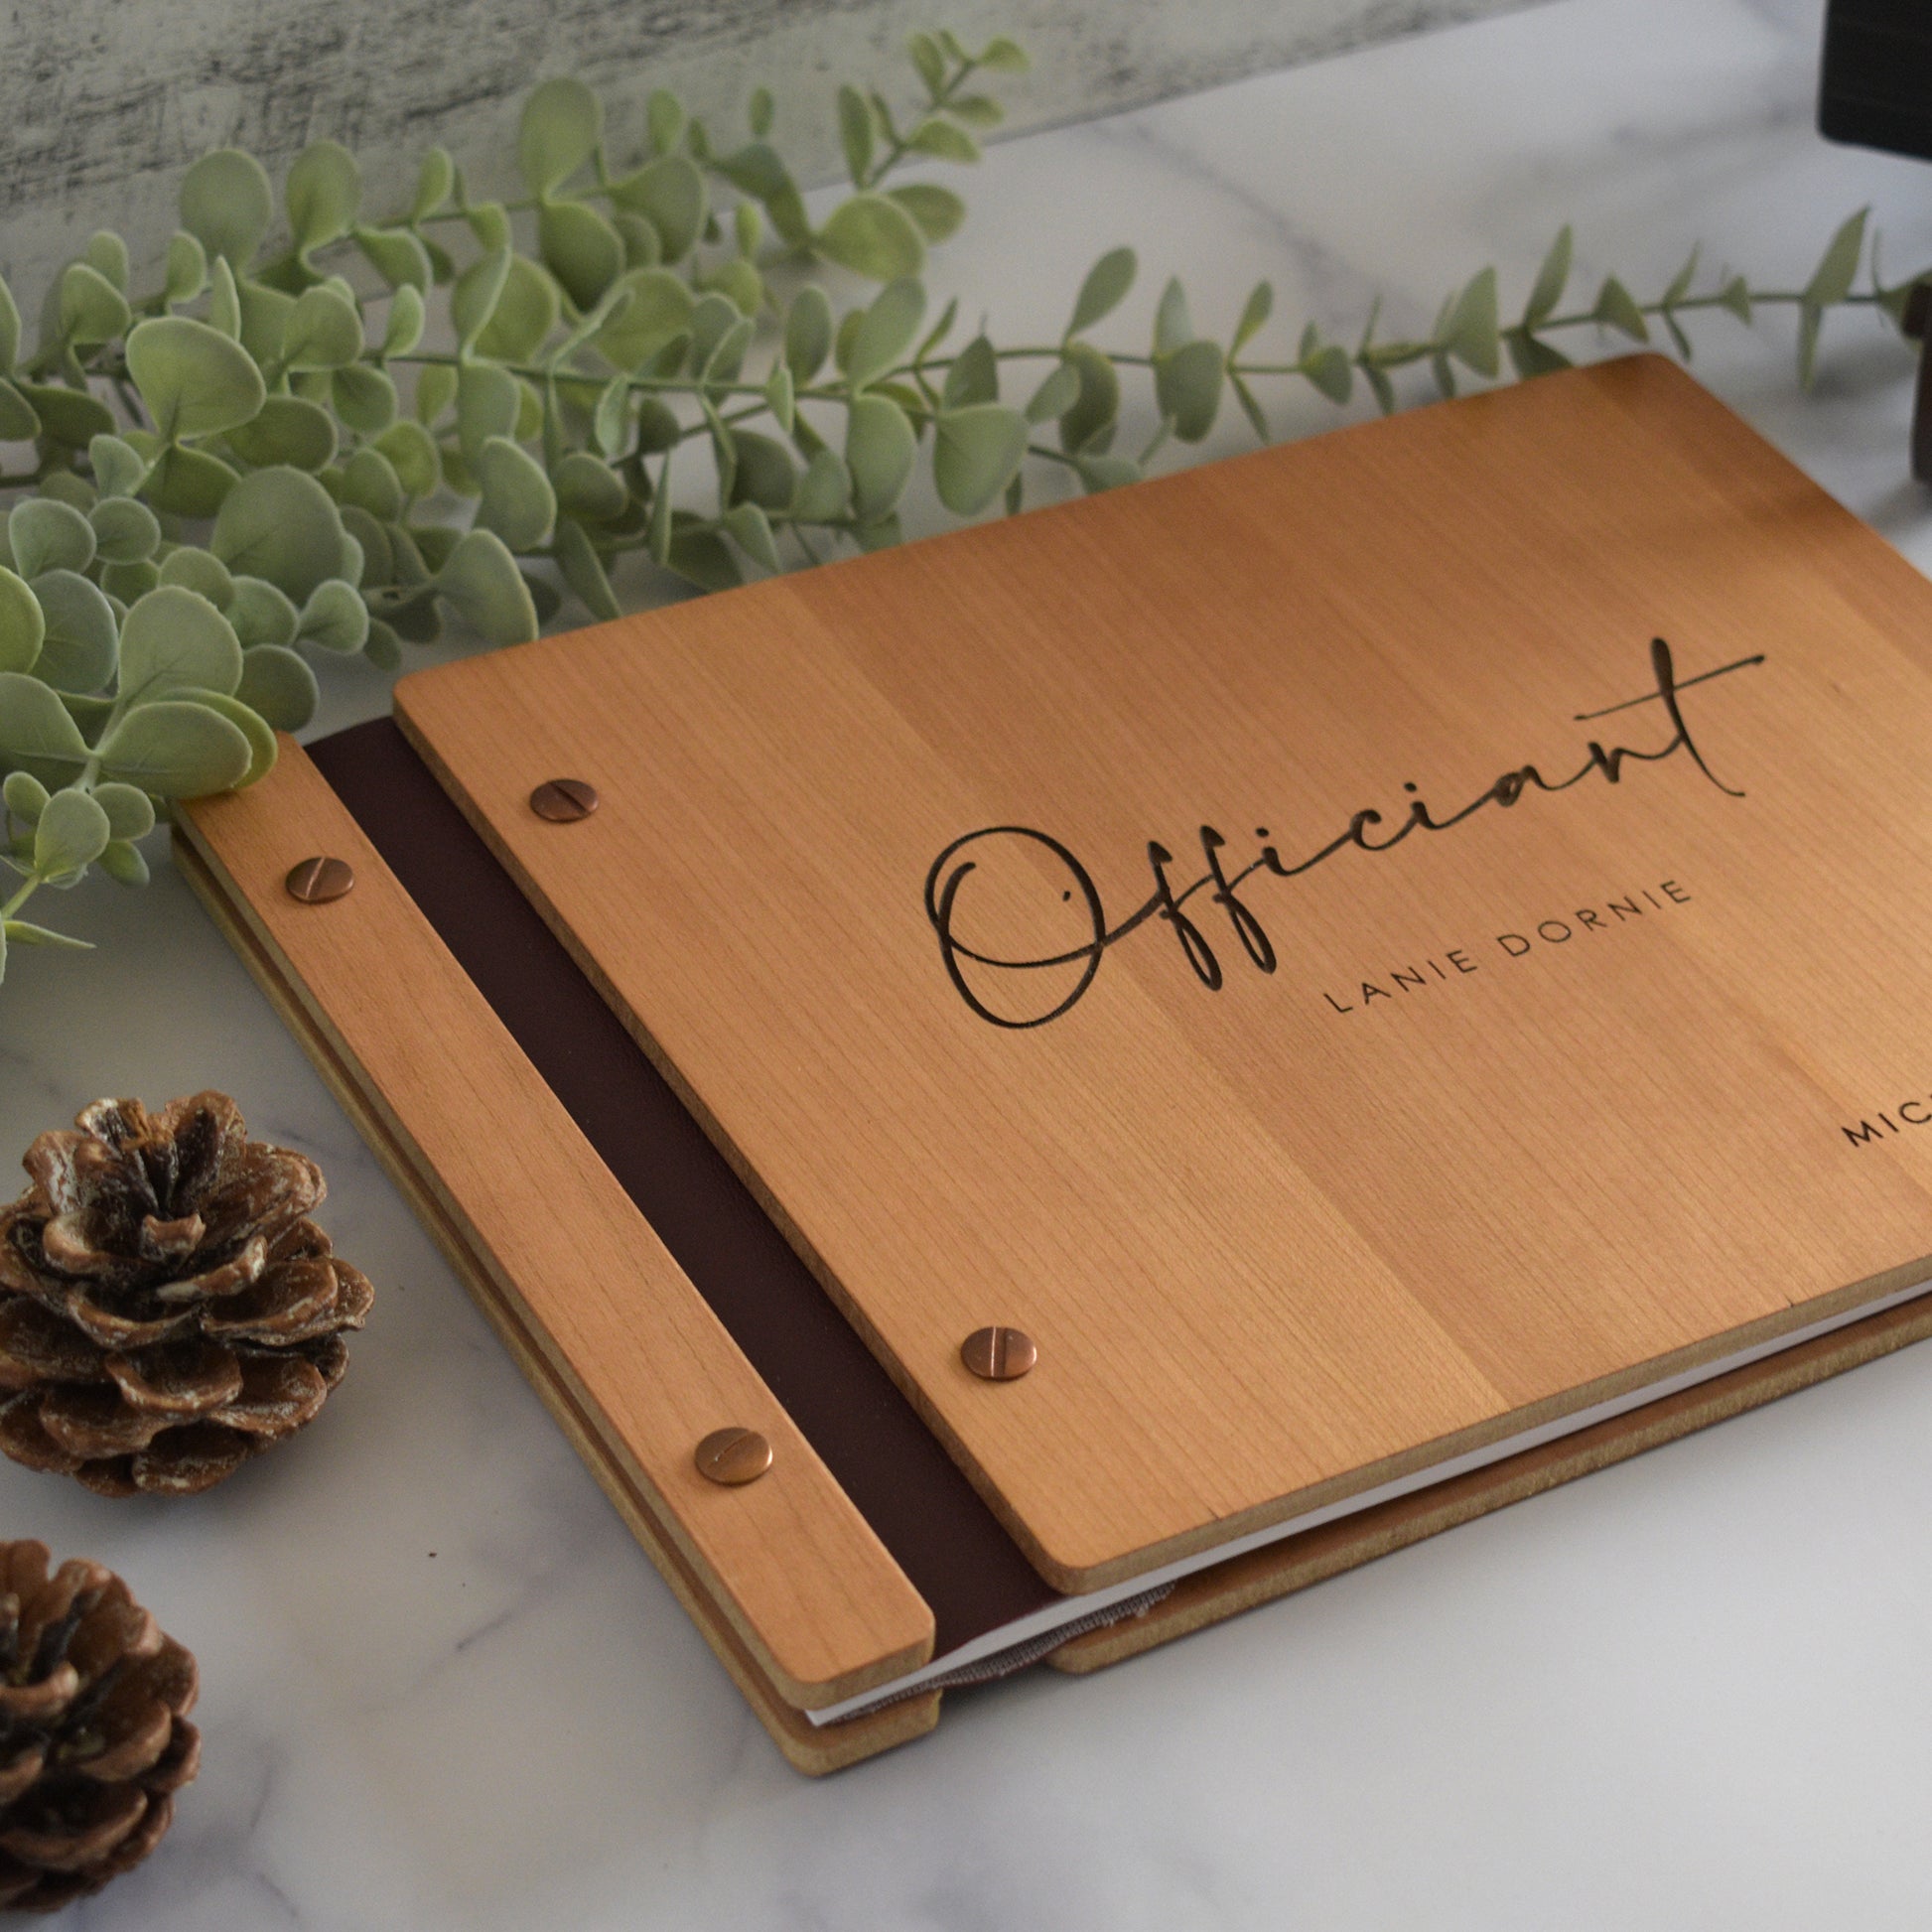 8.5x11" sized book made out of cherry wood, copper hardware, and black vegan leather. This is the perfect gift for your officiant on your wedding day.